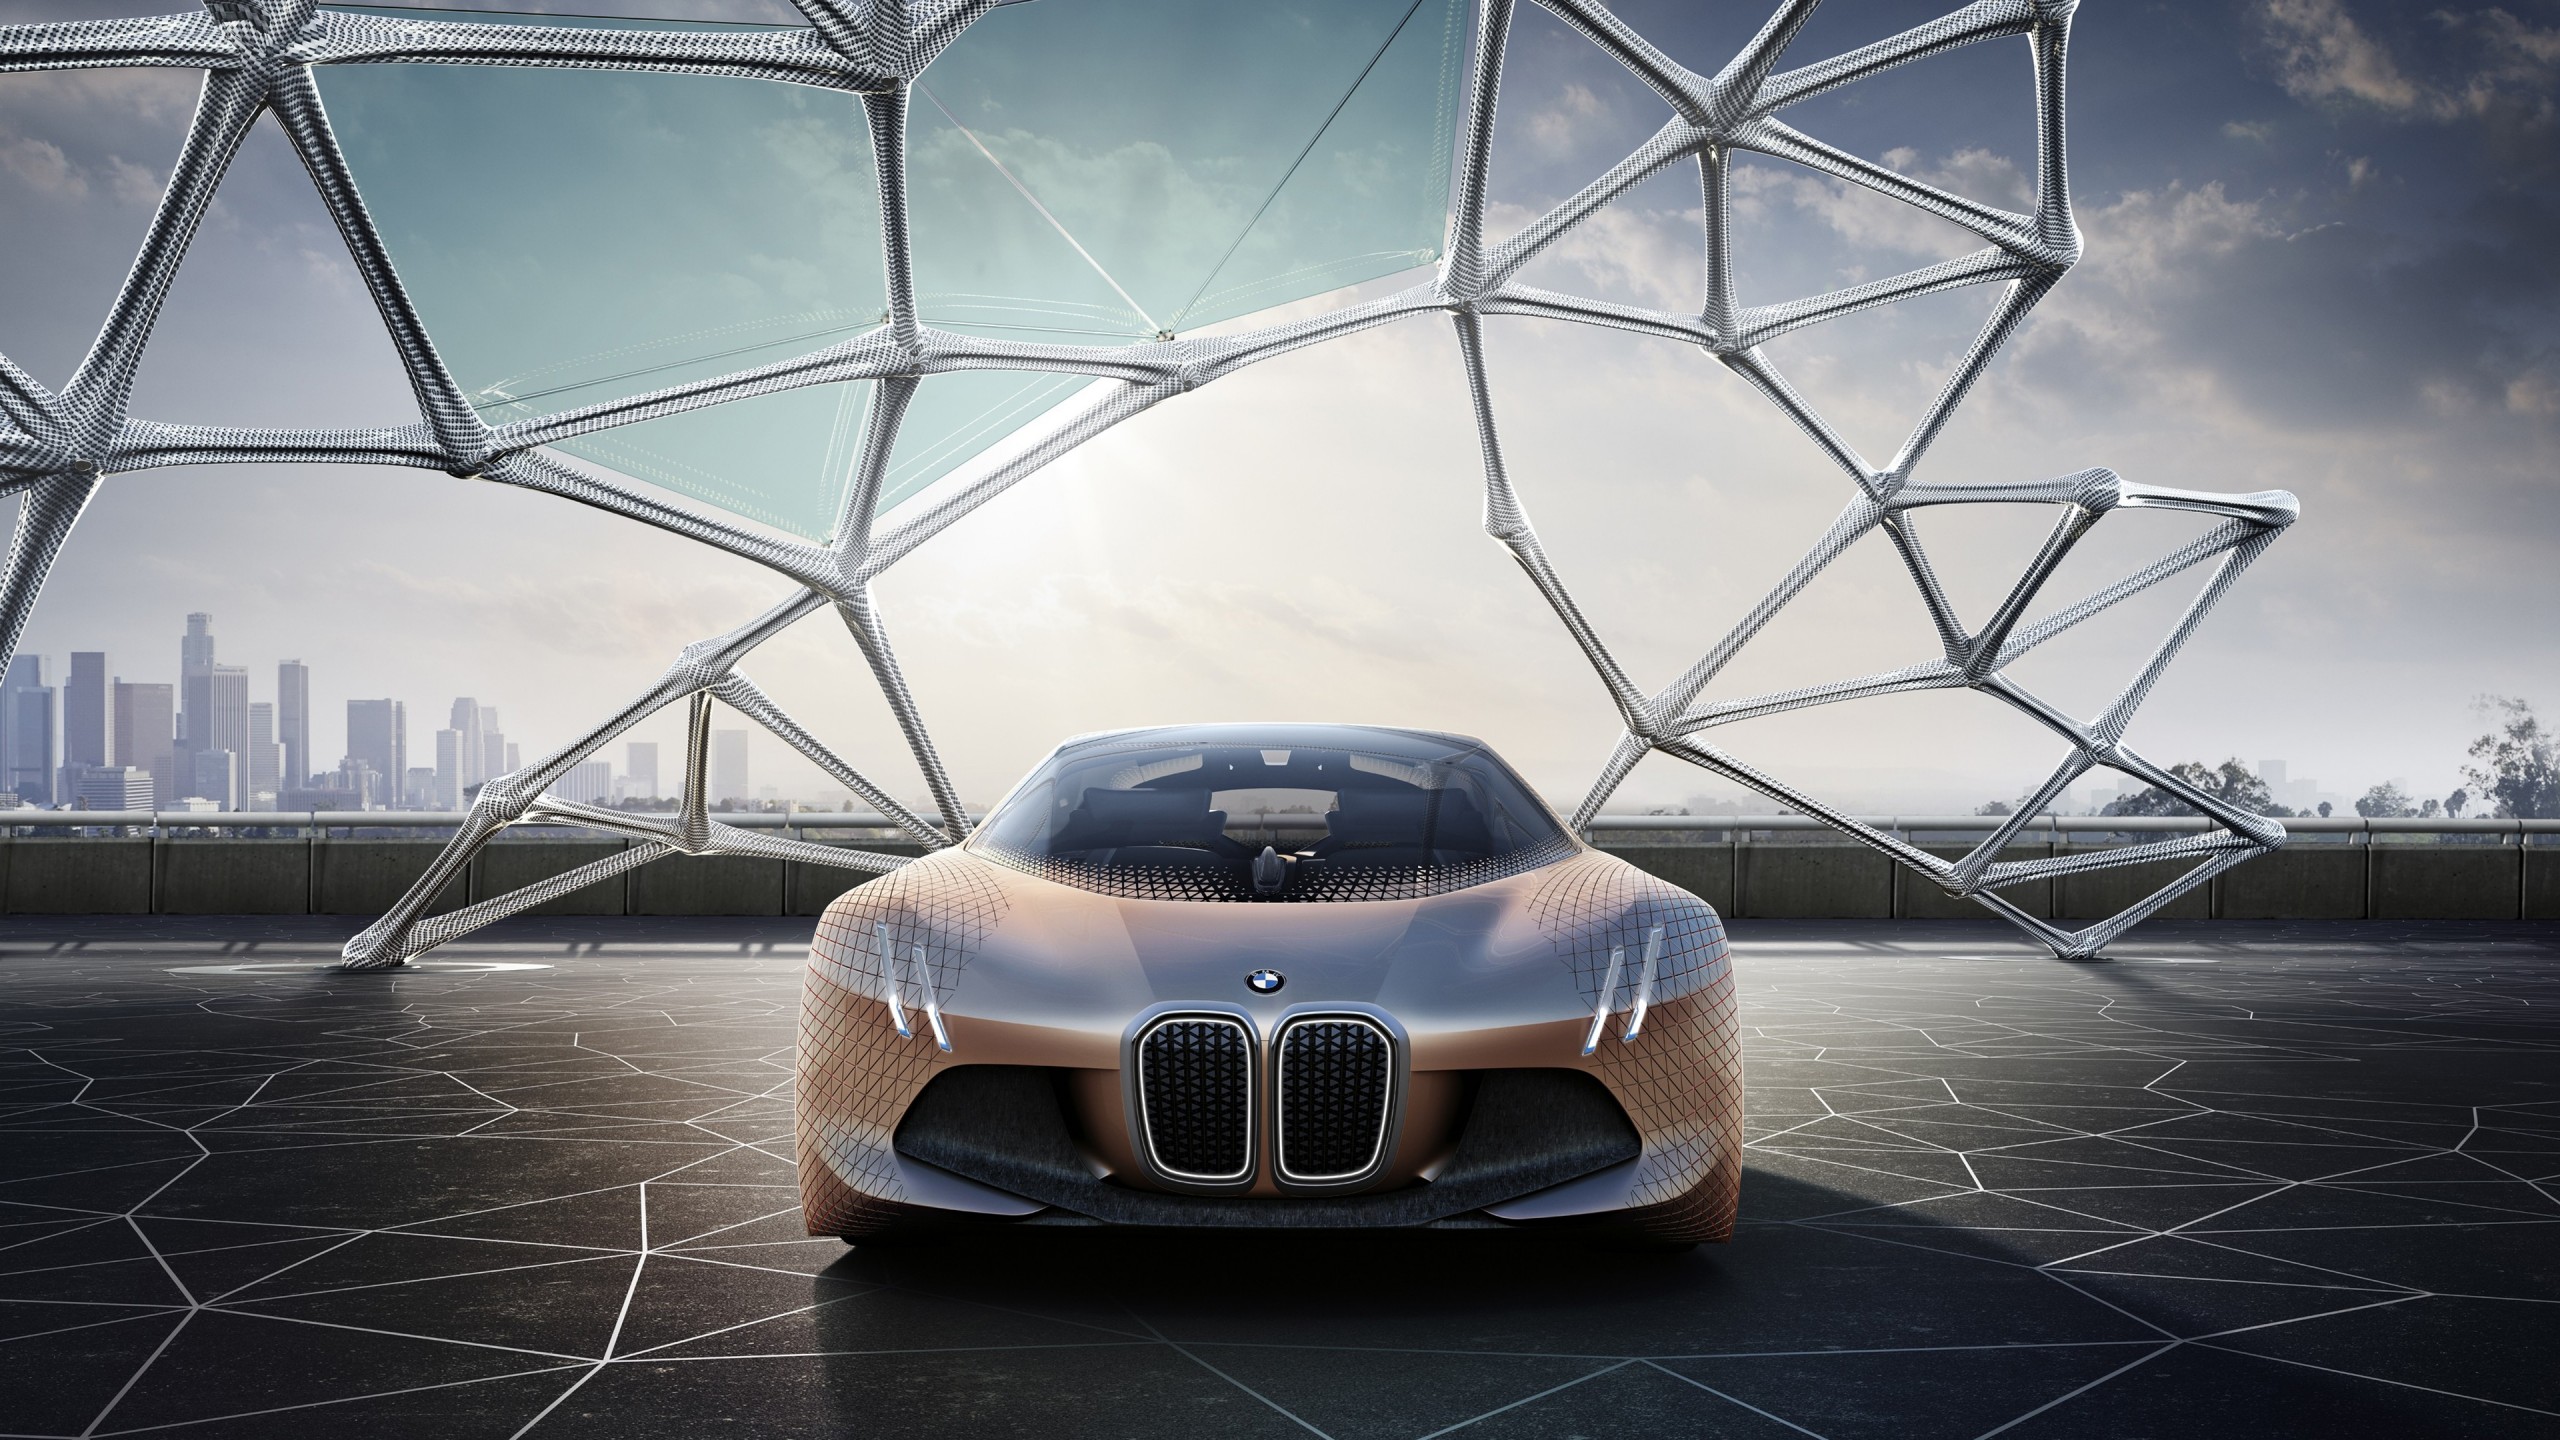 Back To 95 Futuristic Wallpapers Hd - Bmw Vision Next 100 , HD Wallpaper & Backgrounds